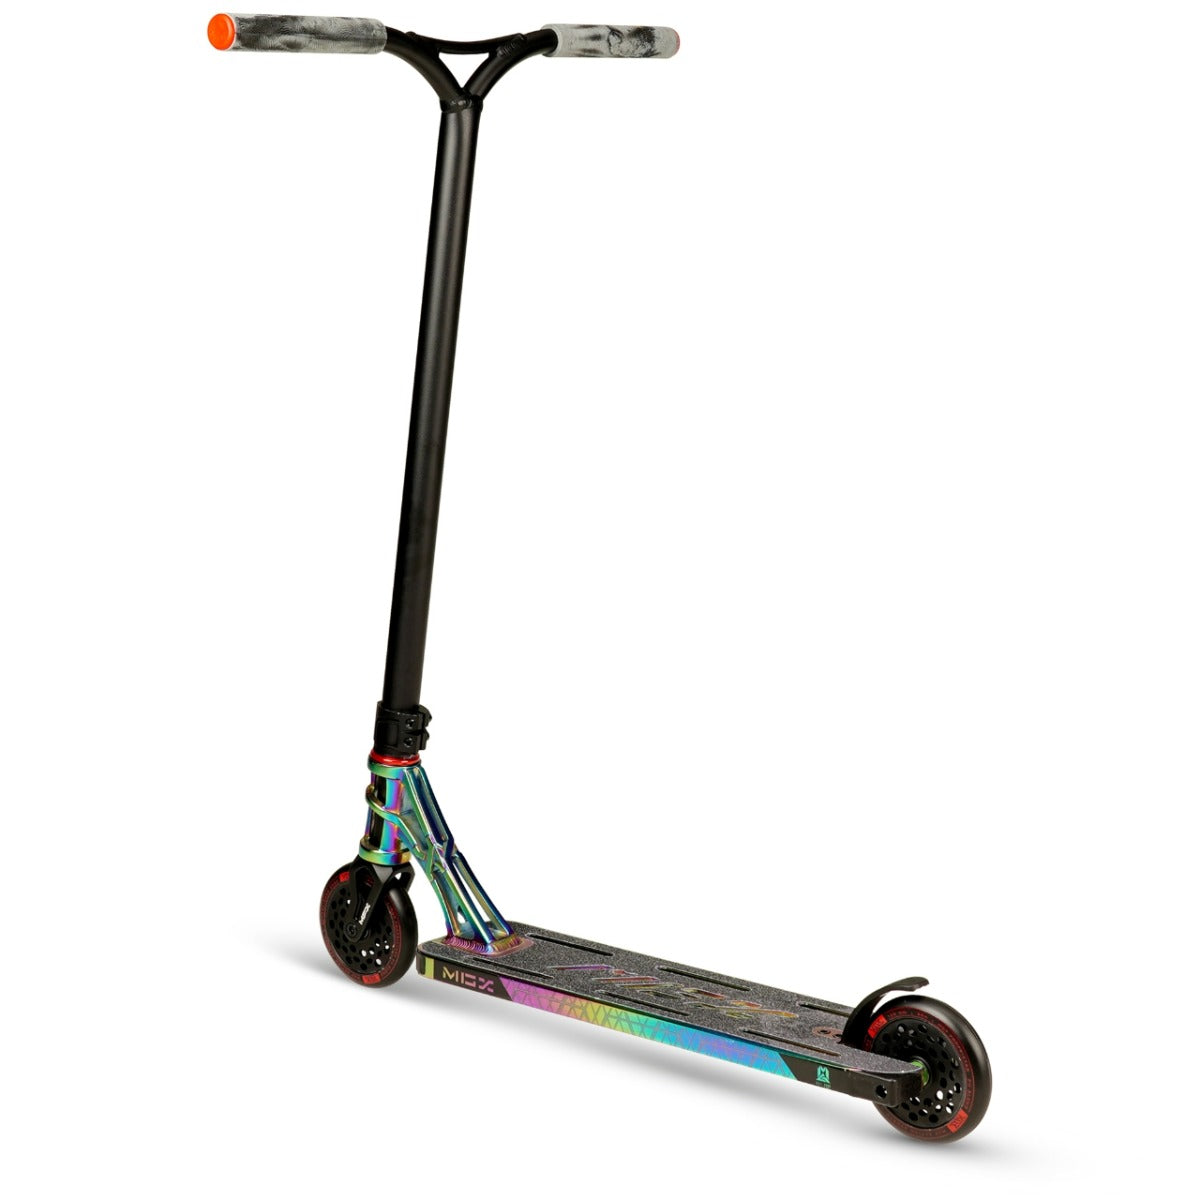 Madd Gear MGP MGX E2 Extreme Complete Stunt Scooter - Neo Slick - Left